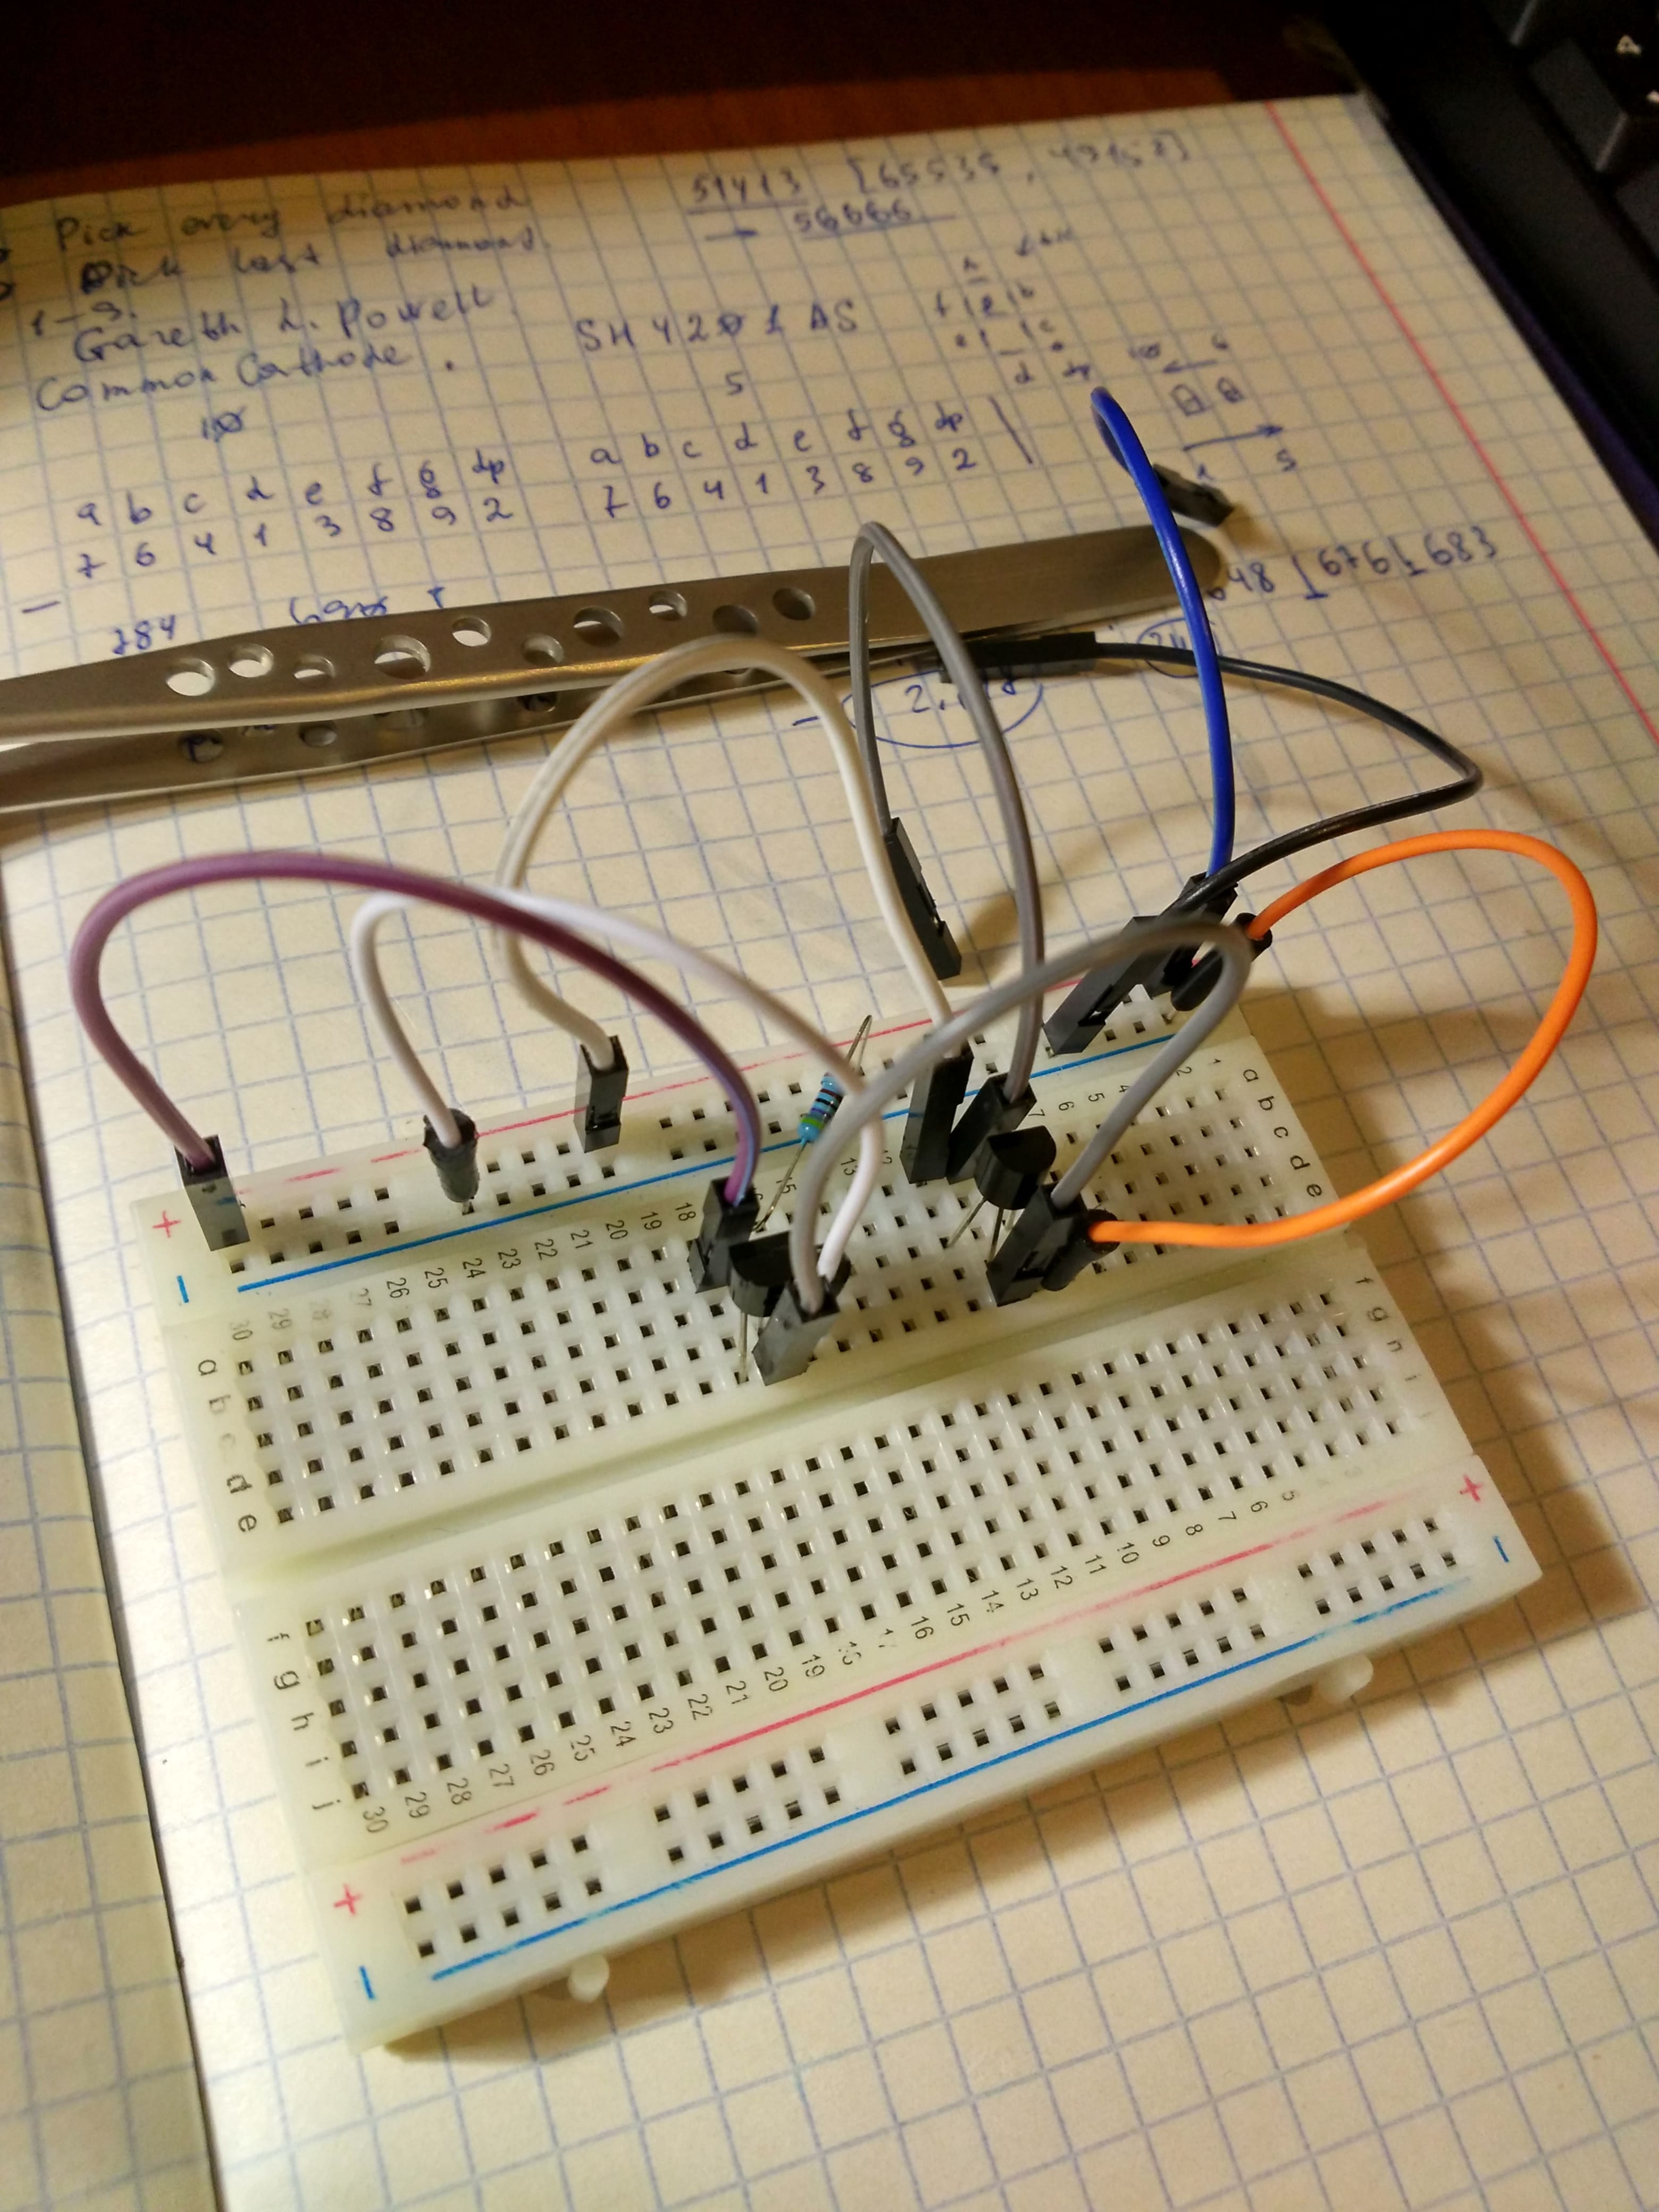 Breadboard with bus